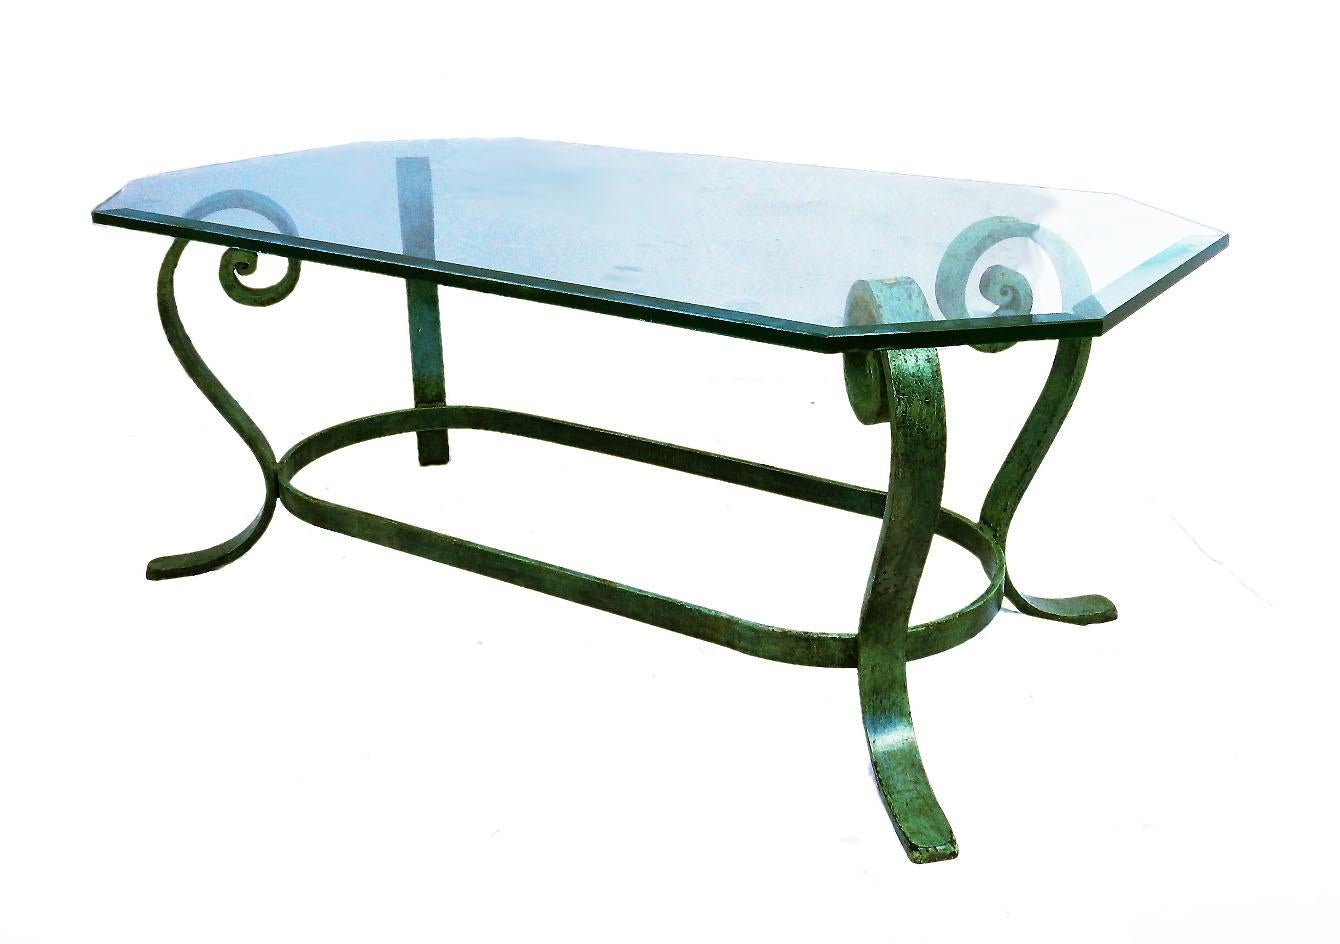 Coffee table French Verdigris iron and glass Hollywood Regency, circa 1970
Hollywood Regency 20th century Louis XV Revival
Heavy glass top octagonal with beveled edges
Iron base with green verdigris finish
The base can be used either way up as